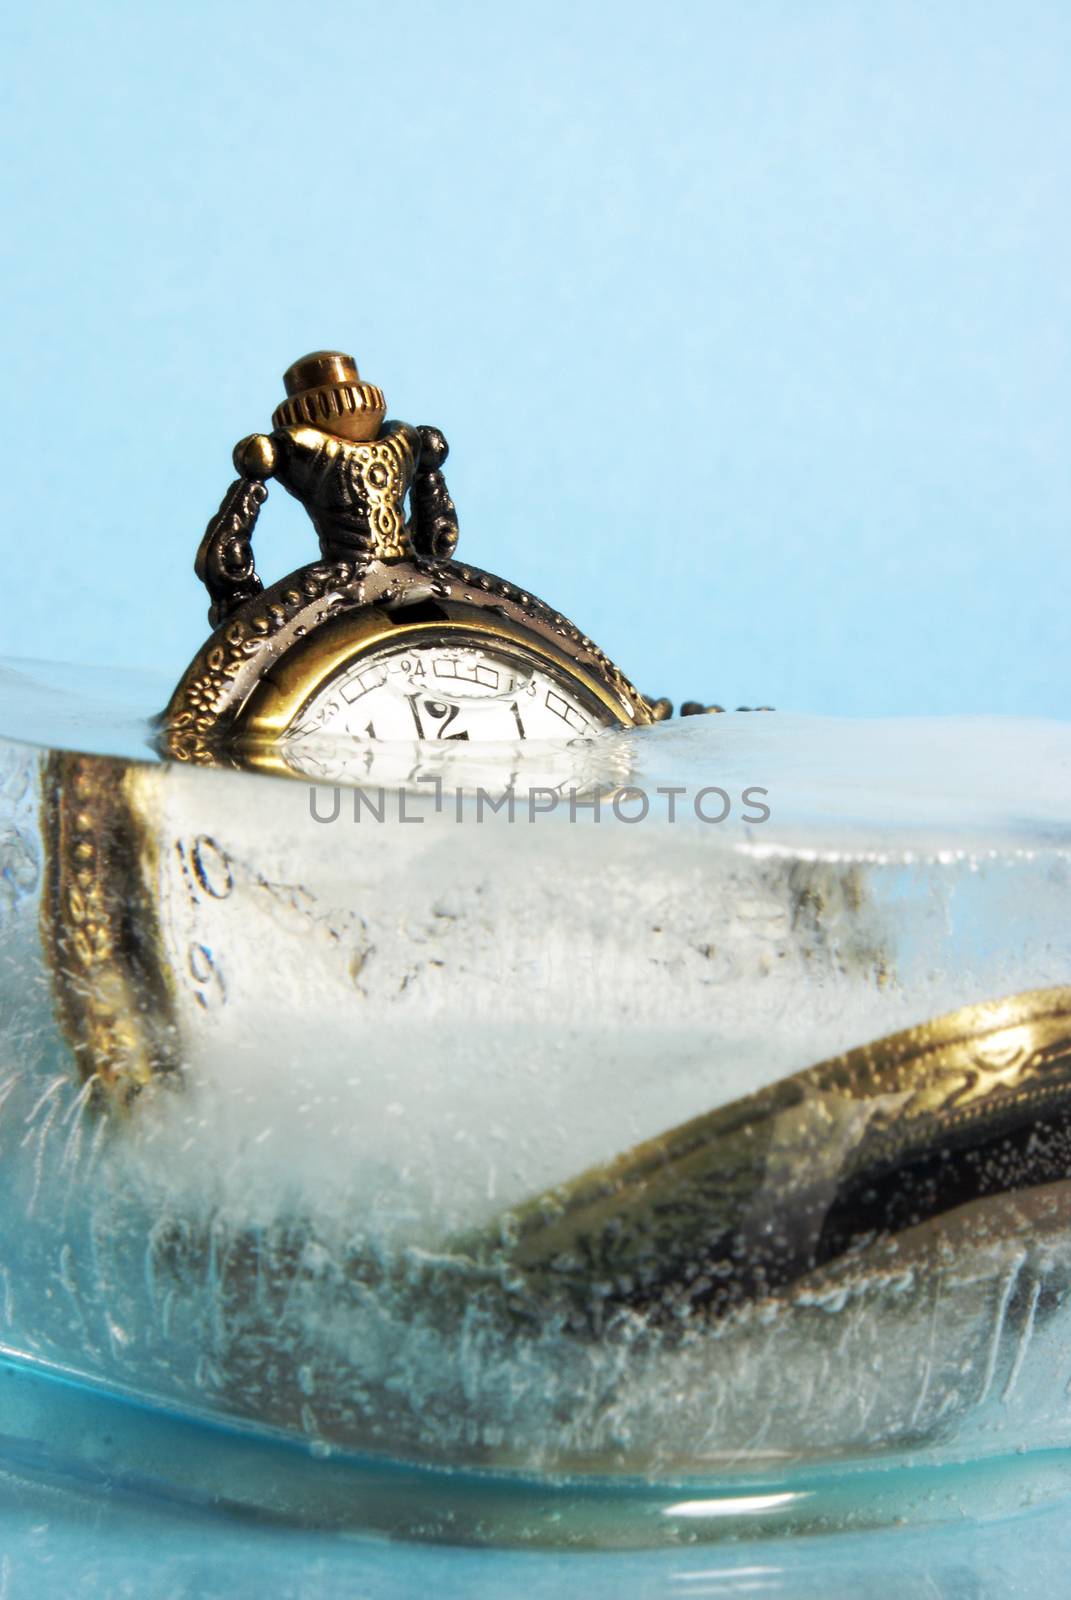 A block of ice has trapped this measurement of time in its cold deep freeze.